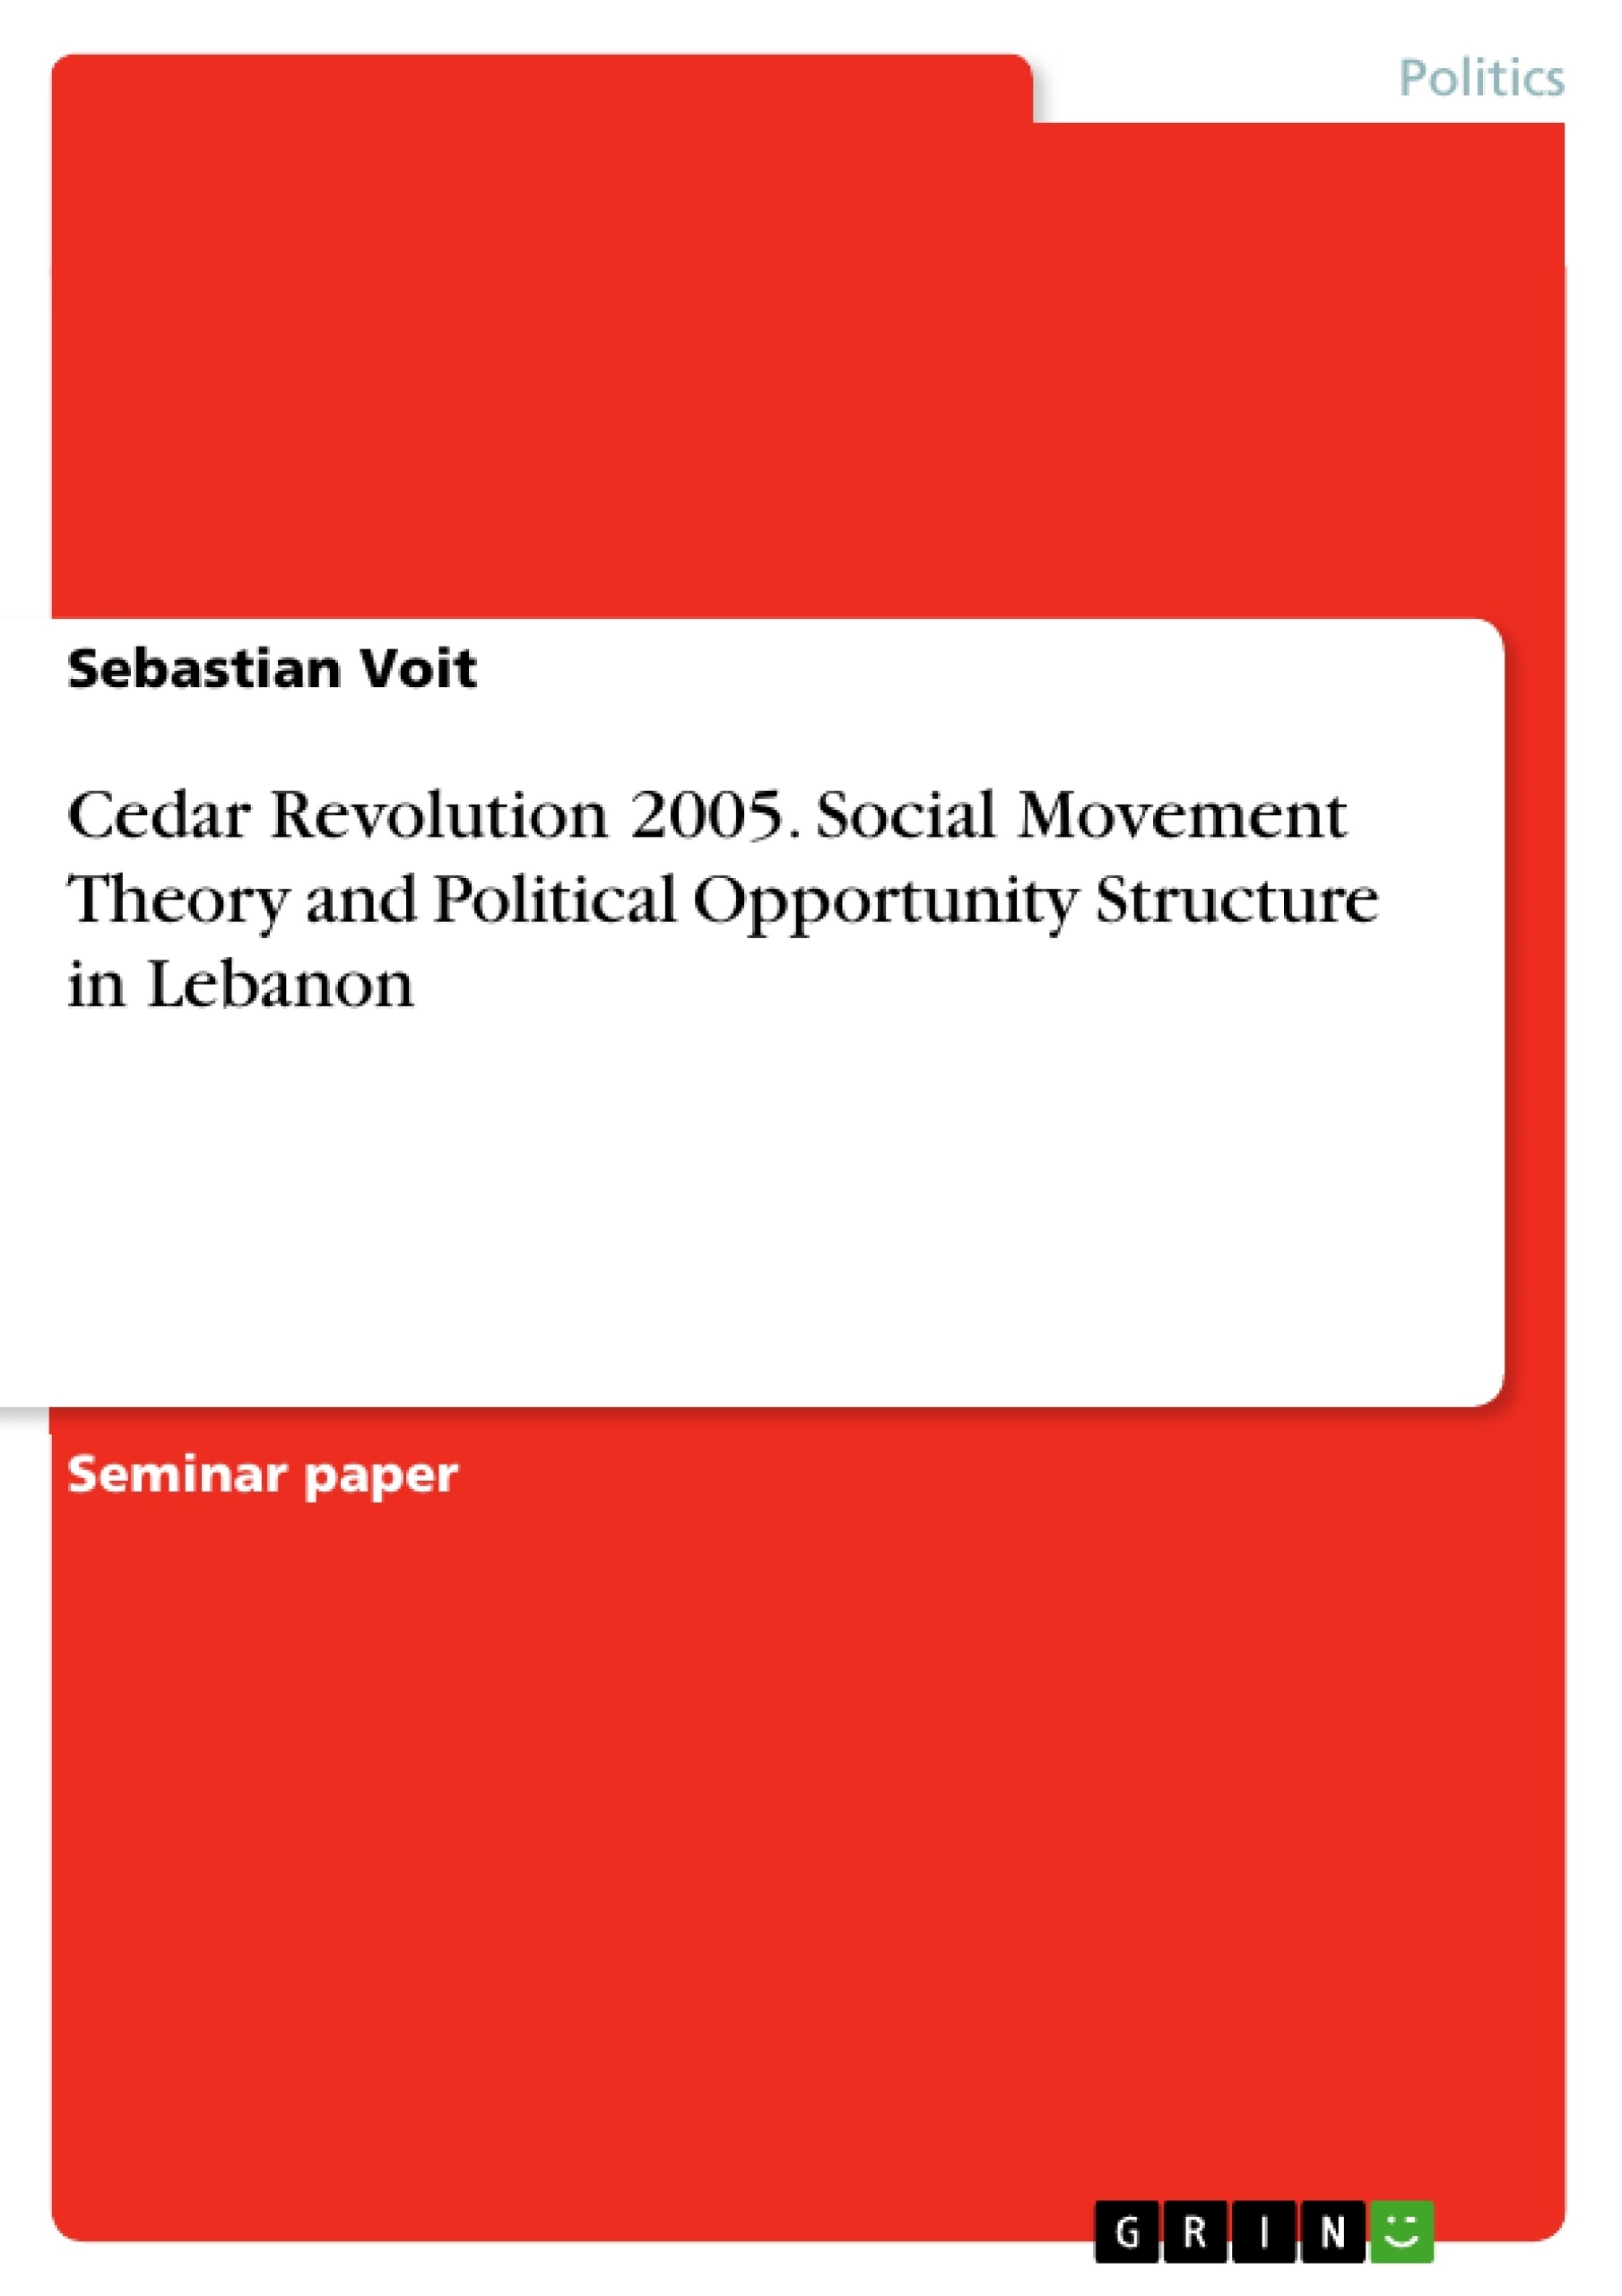 Title: Cedar Revolution 2005. Social Movement Theory and Political Opportunity Structure in Lebanon